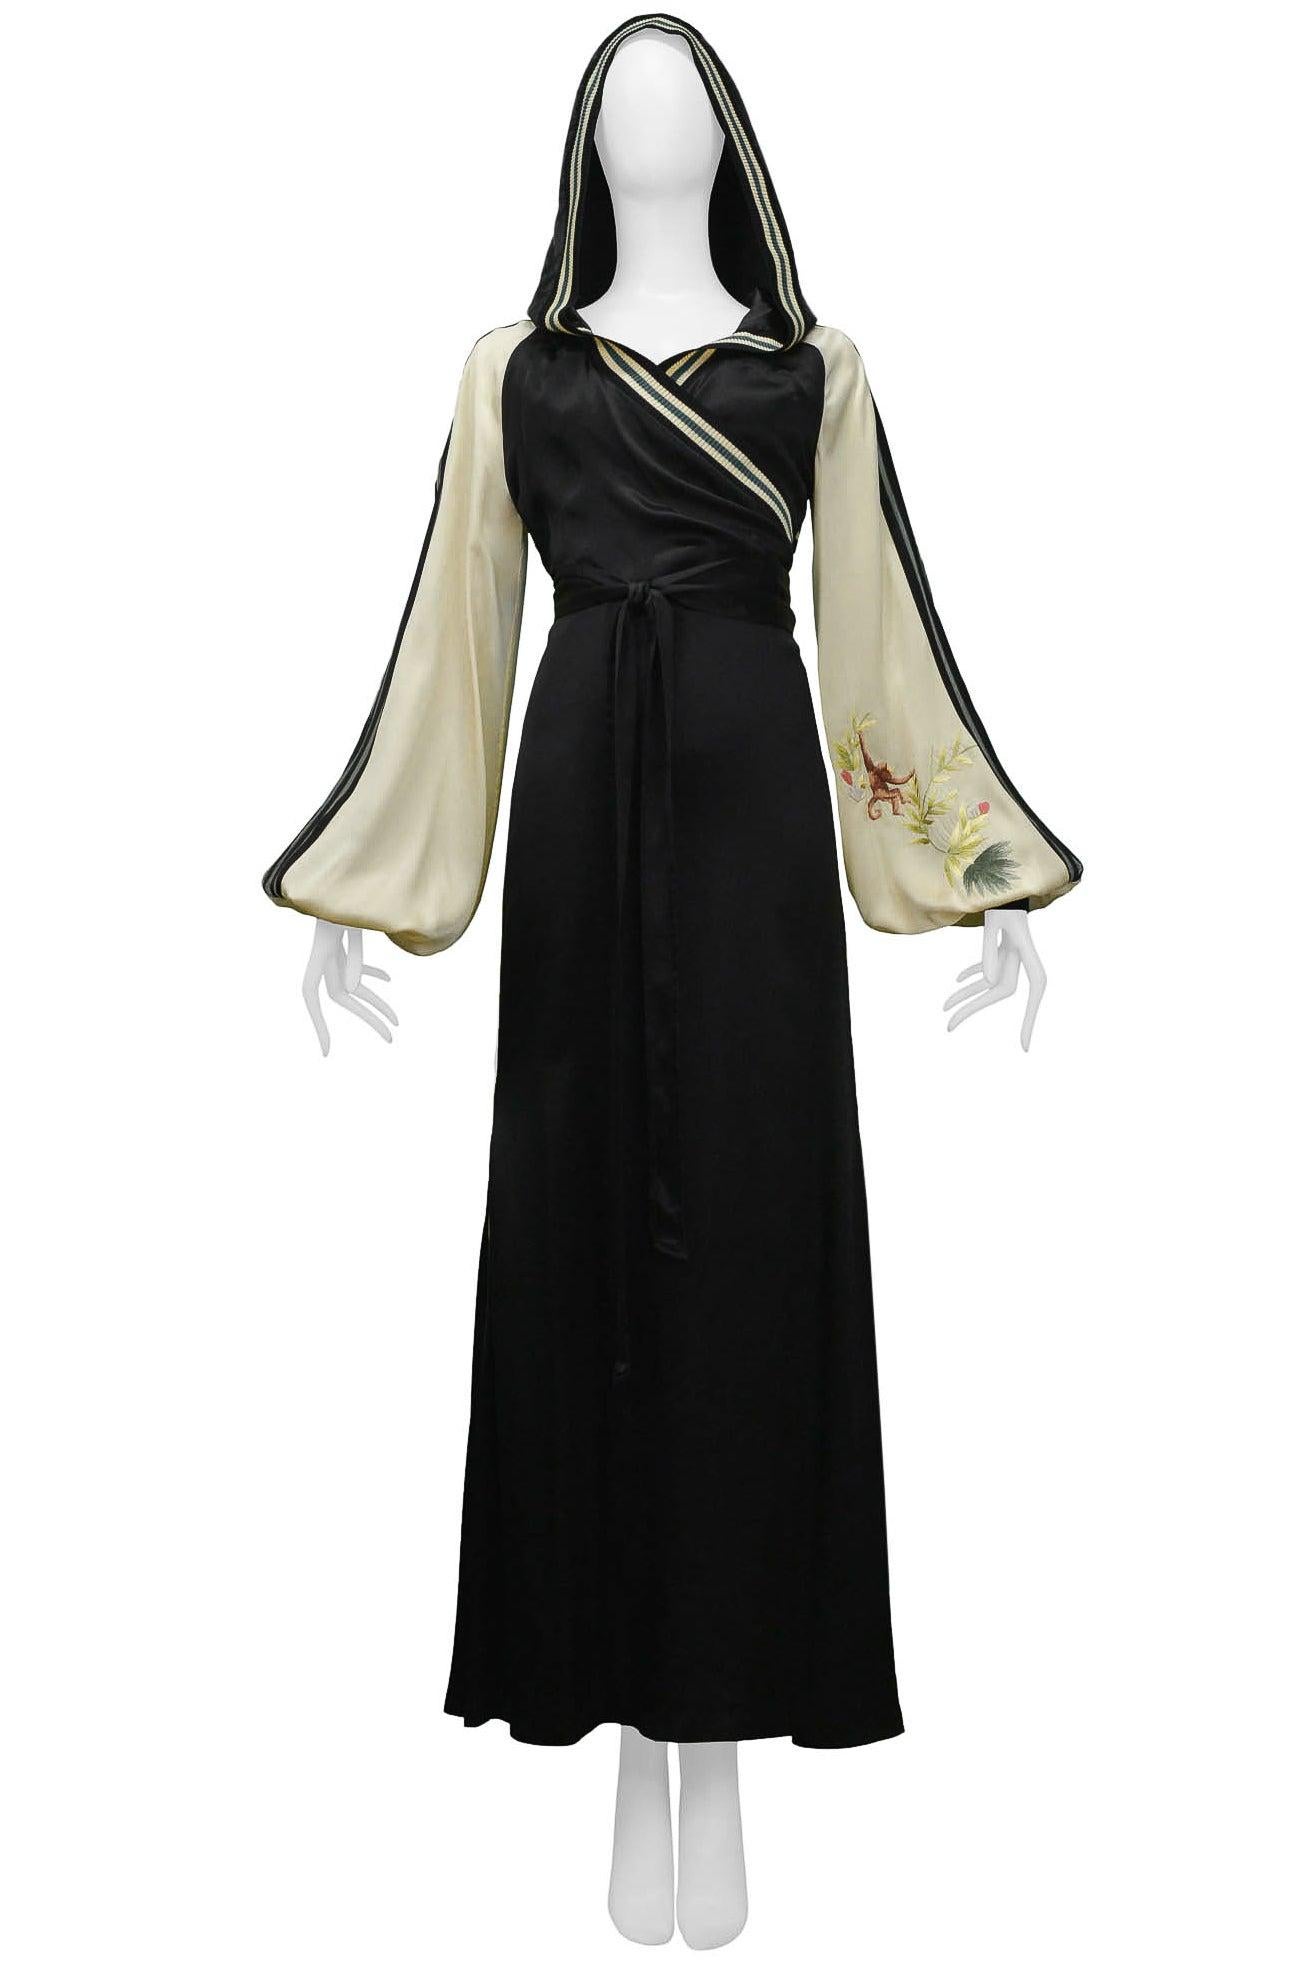 Resurrection Vintage is excited to offer a vintage Jean Paul Gaultier black and cream satin ensemble that includes a wrap front jacket and long satin dress.  The ensemble features embroidery detailing on the front sleeves and back of the jacket,